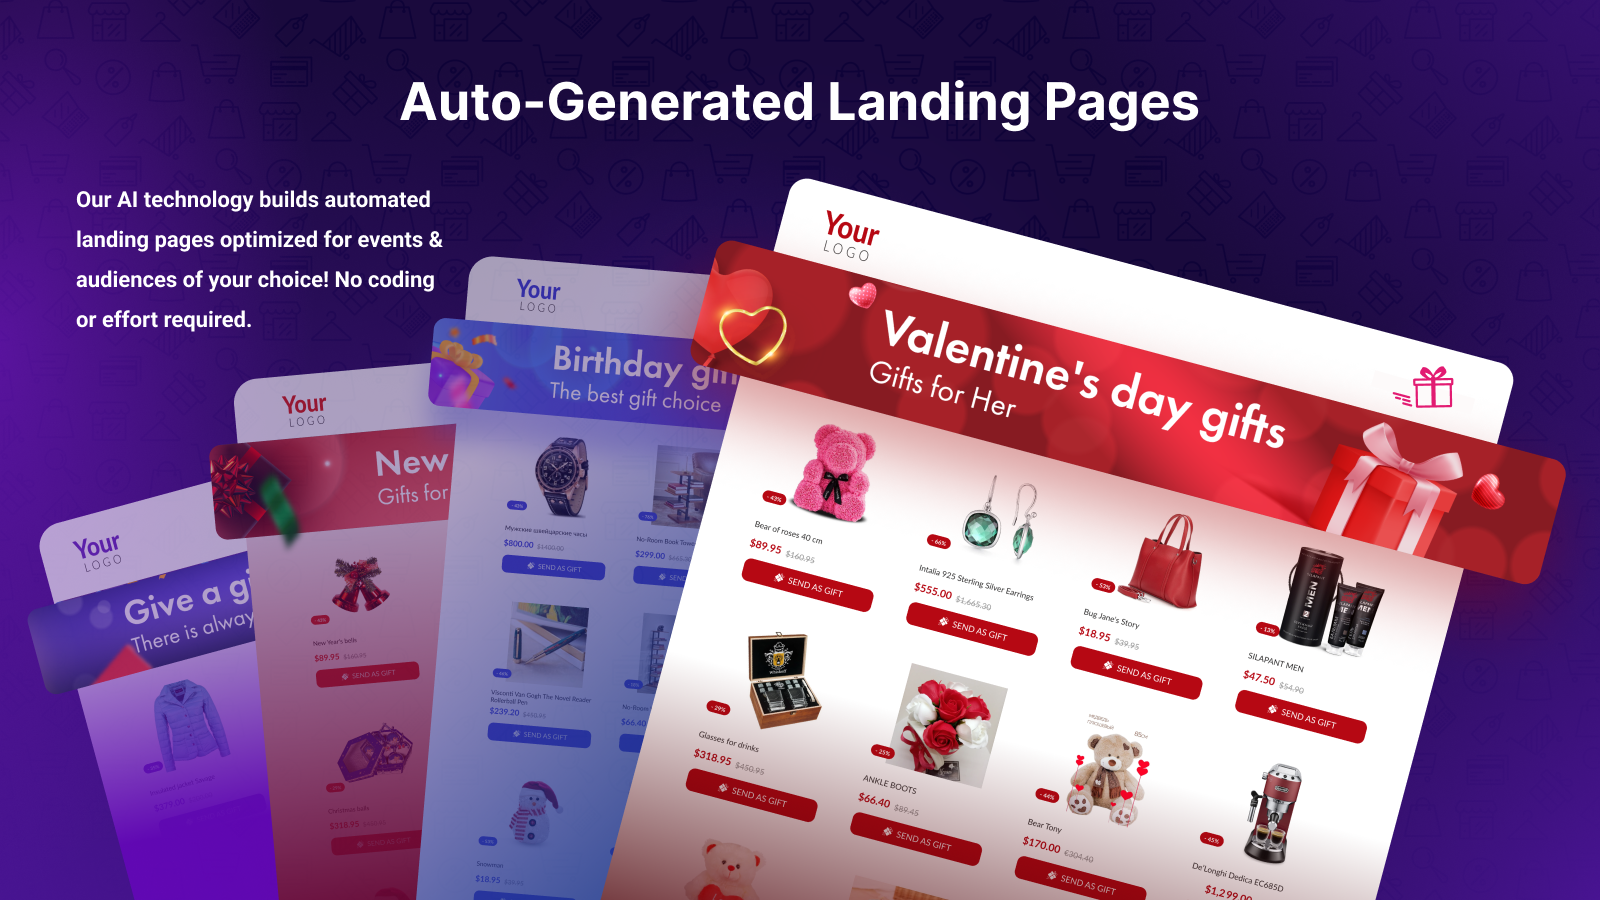 Auto-generated landing pages